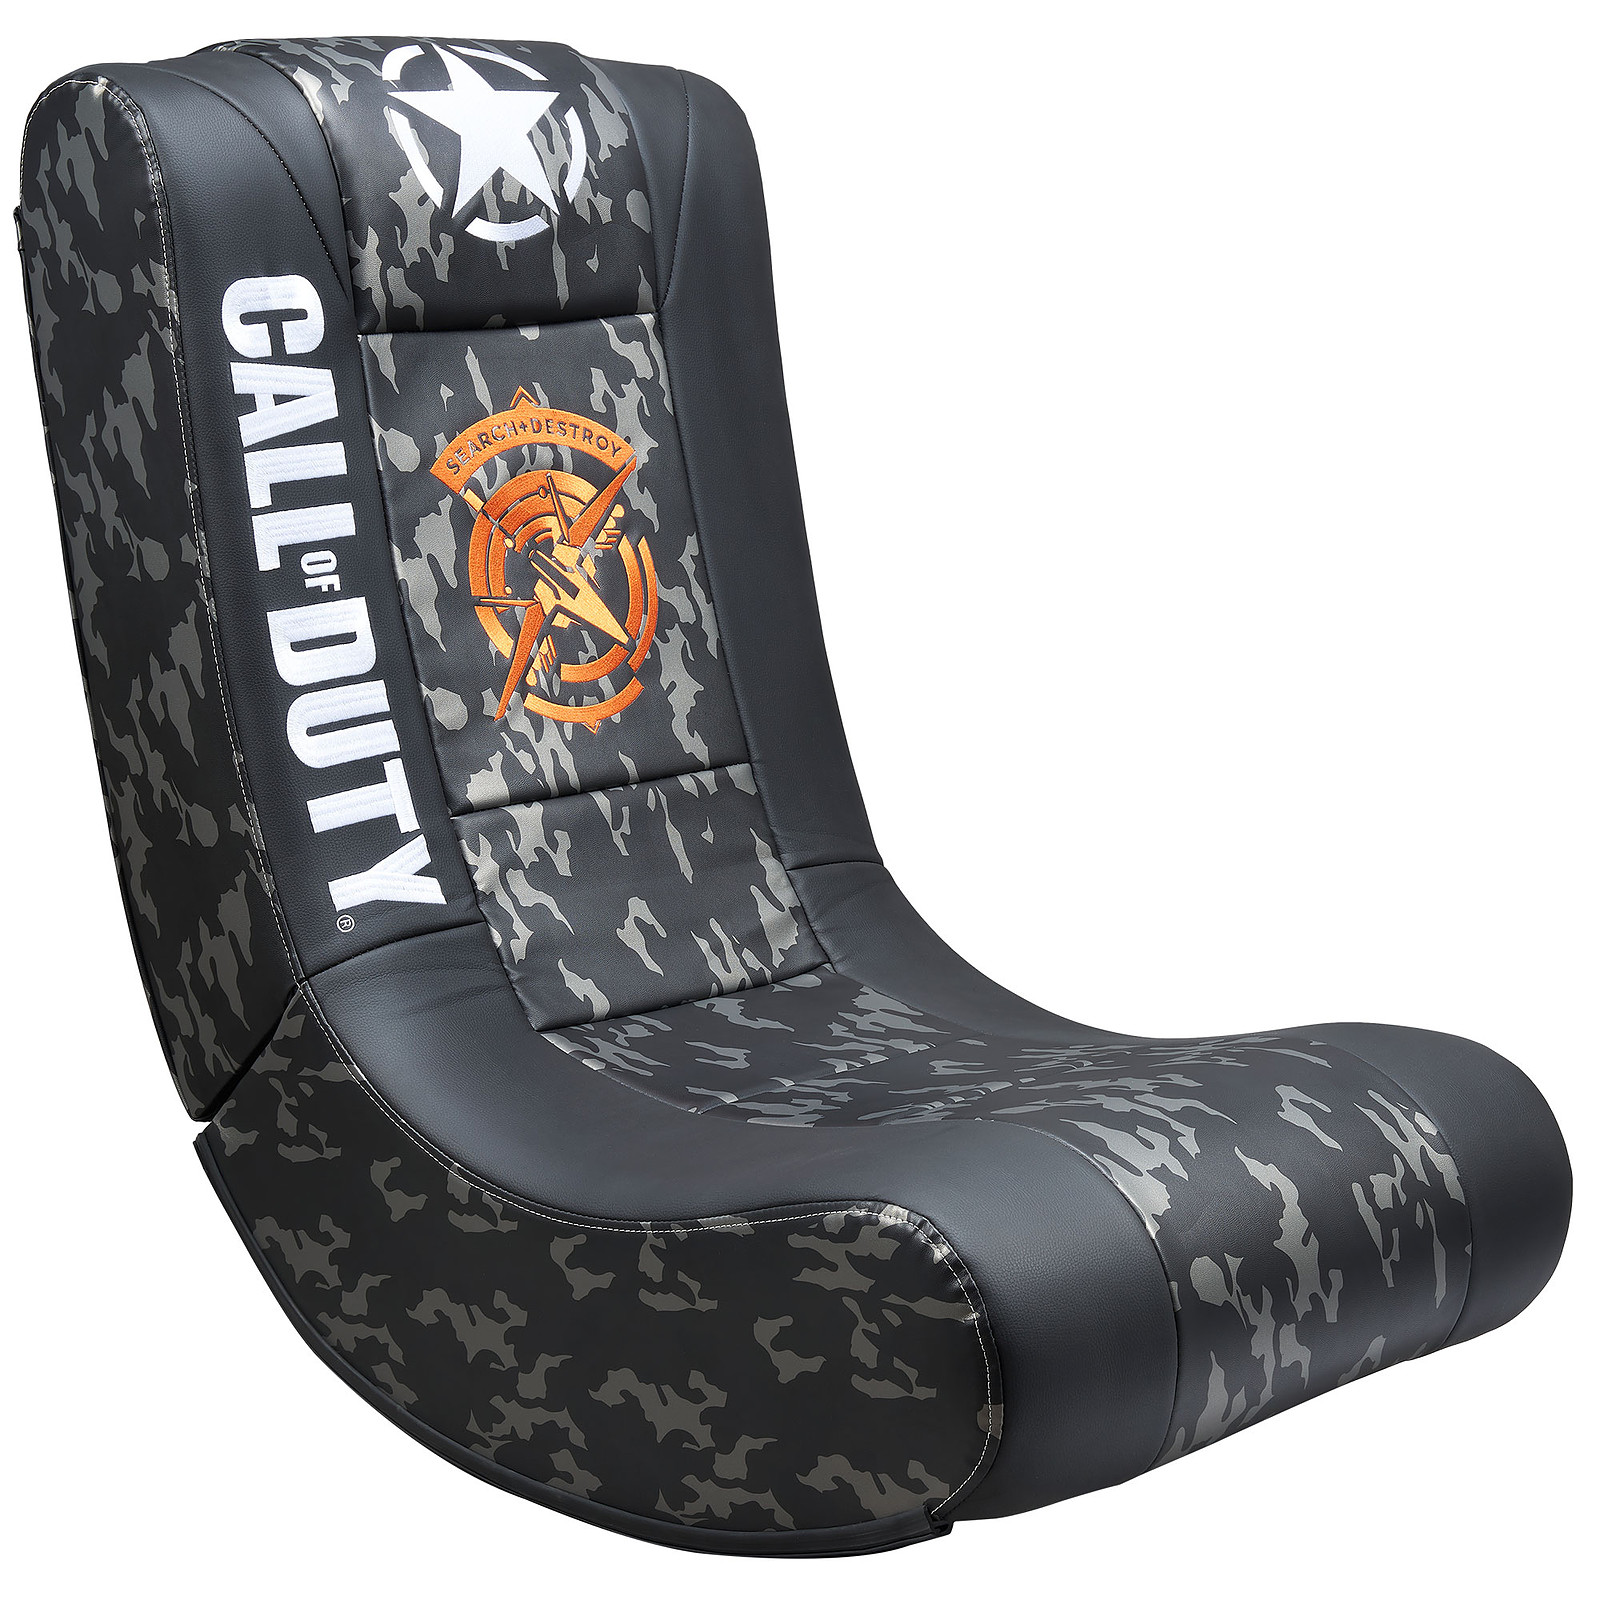 Subsonic Fauteuil Rock'N'Seat COD Call of Duty - Fauteuil gamer Subsonic